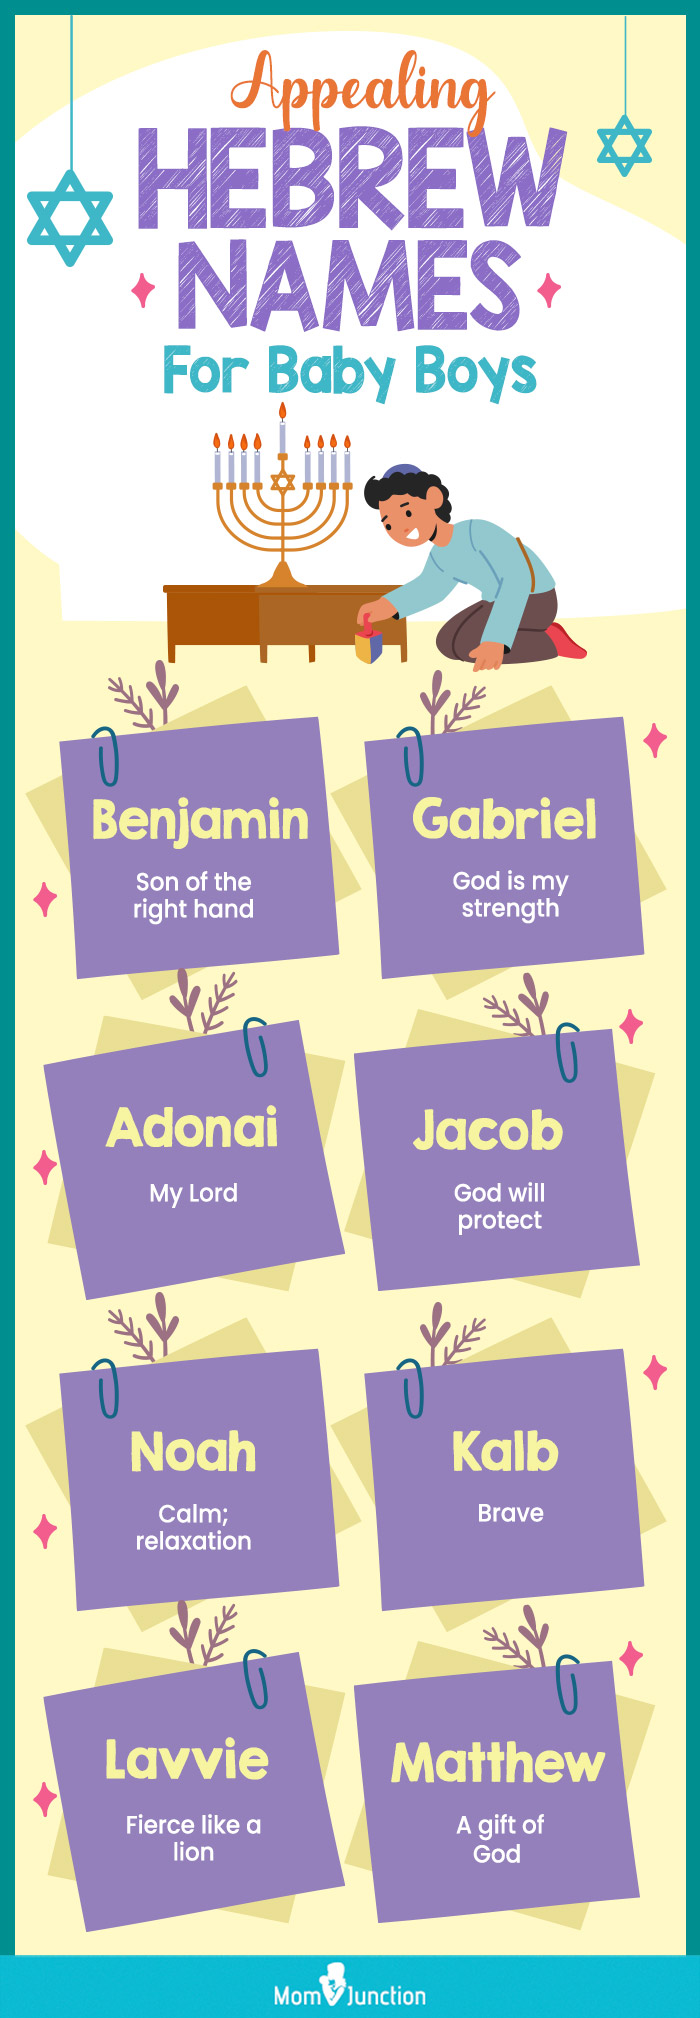 appealing hebrew names names for baby boys (infographic)